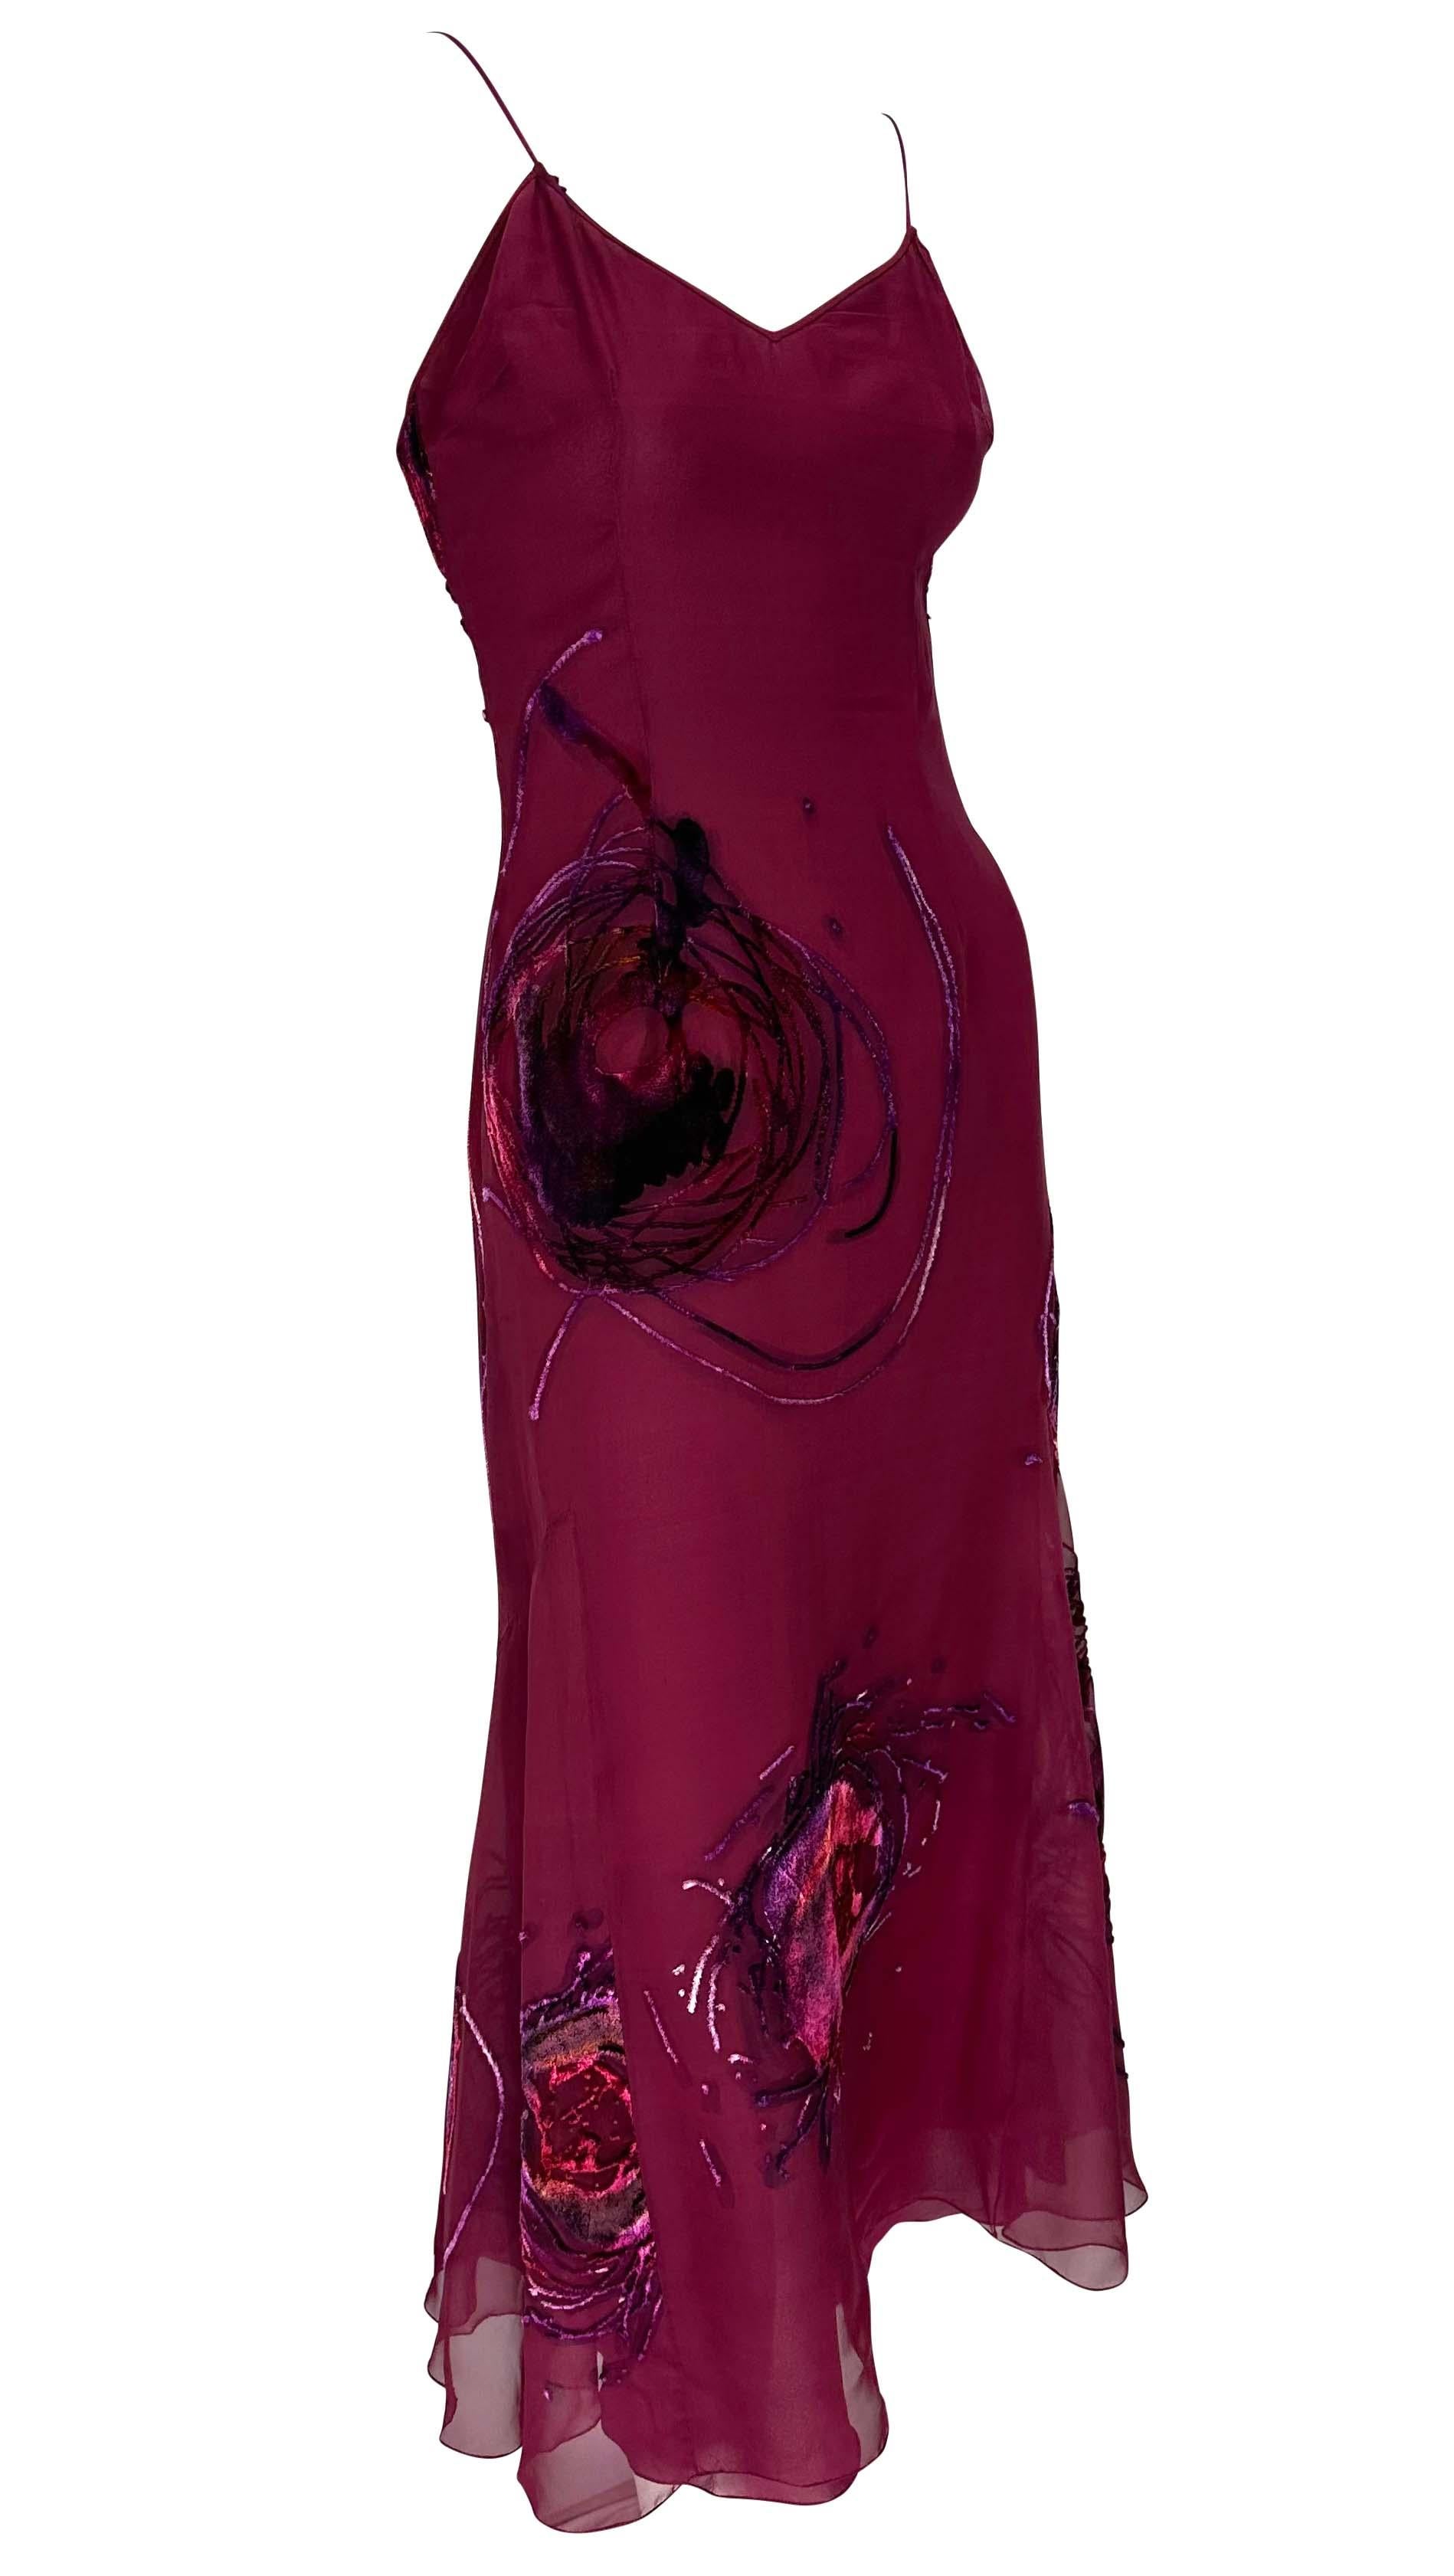 S/S 2001 Christian Dior by John Galliano Dyed Velvet Abstract Maroon Flare Dress For Sale 4